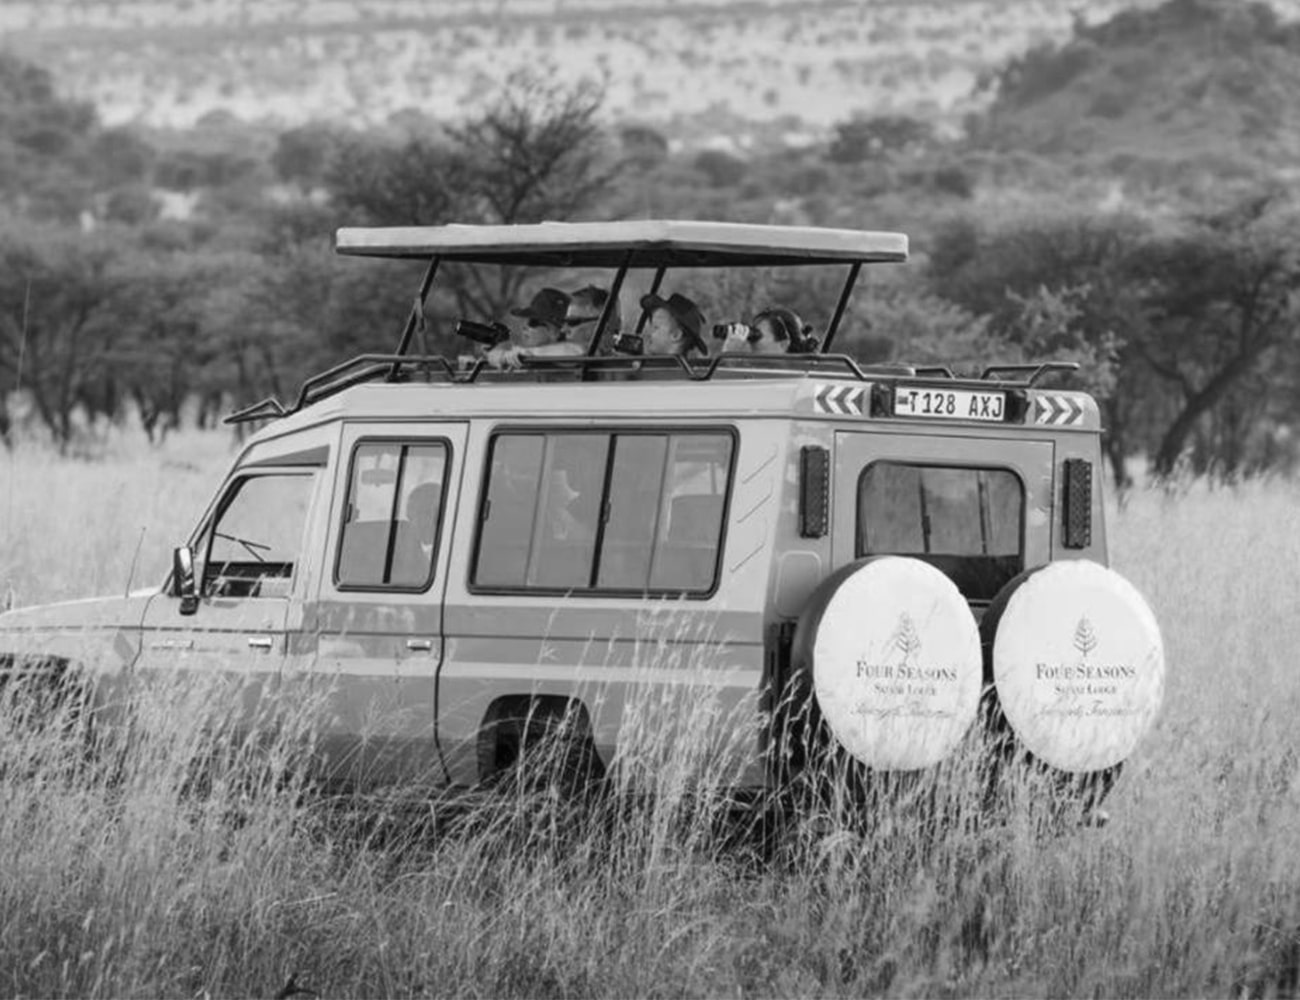 Four Seasons Hotel Tour Jeep in the Serengeti